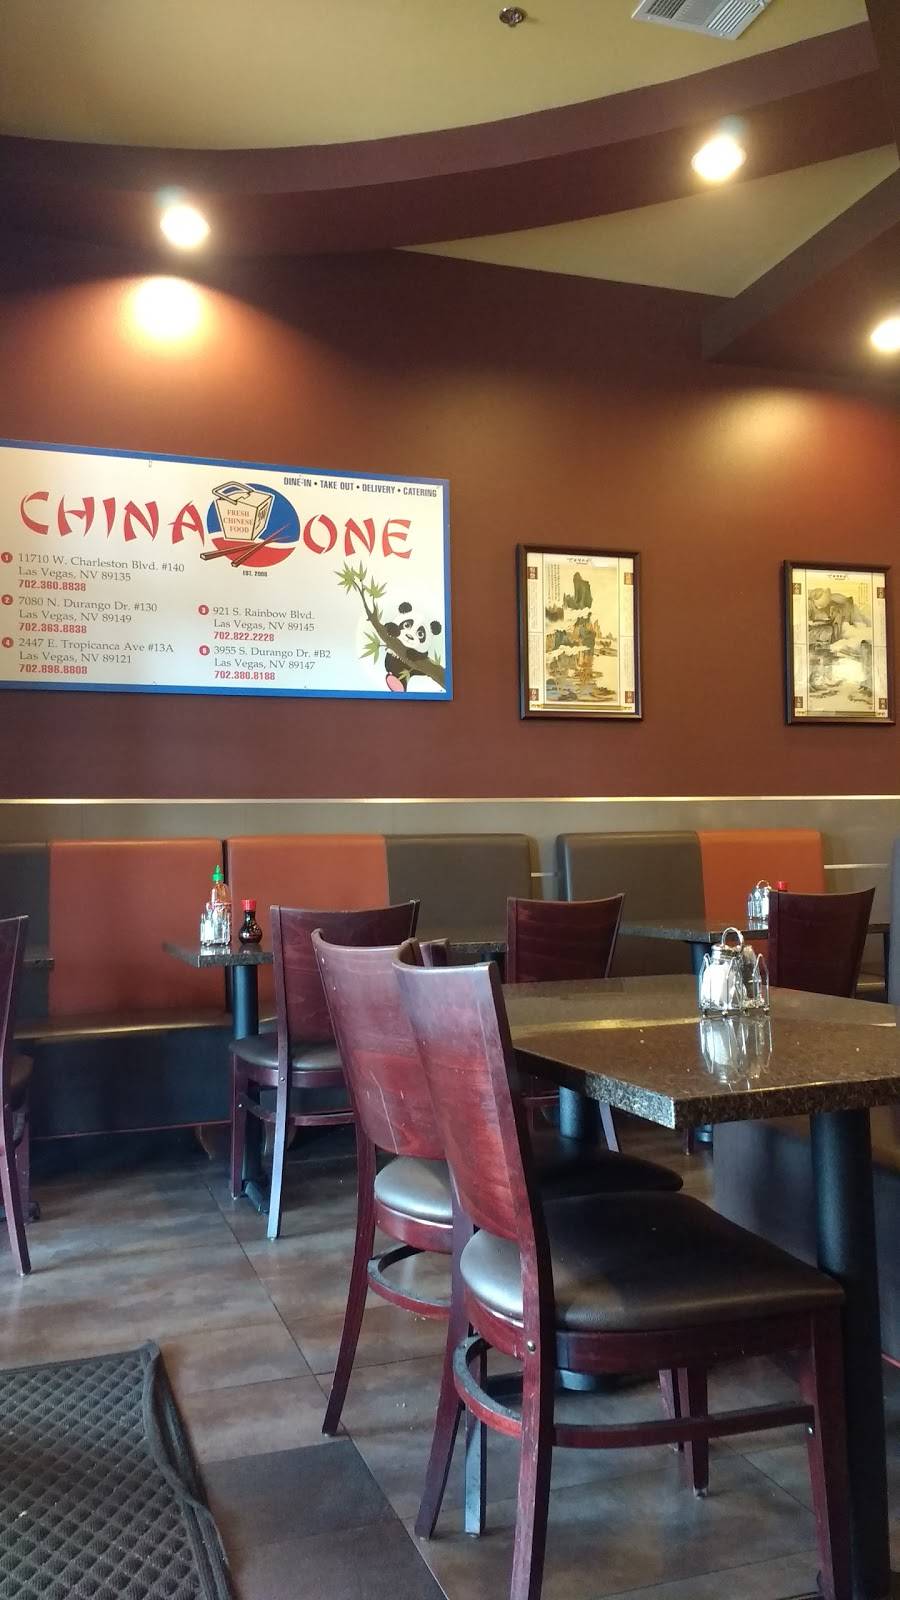 China One - N Durango | meal delivery | 7080 N Durango Dr #130, Las Vegas, NV 89149, USA | 7023638855 OR +1 702-363-8855